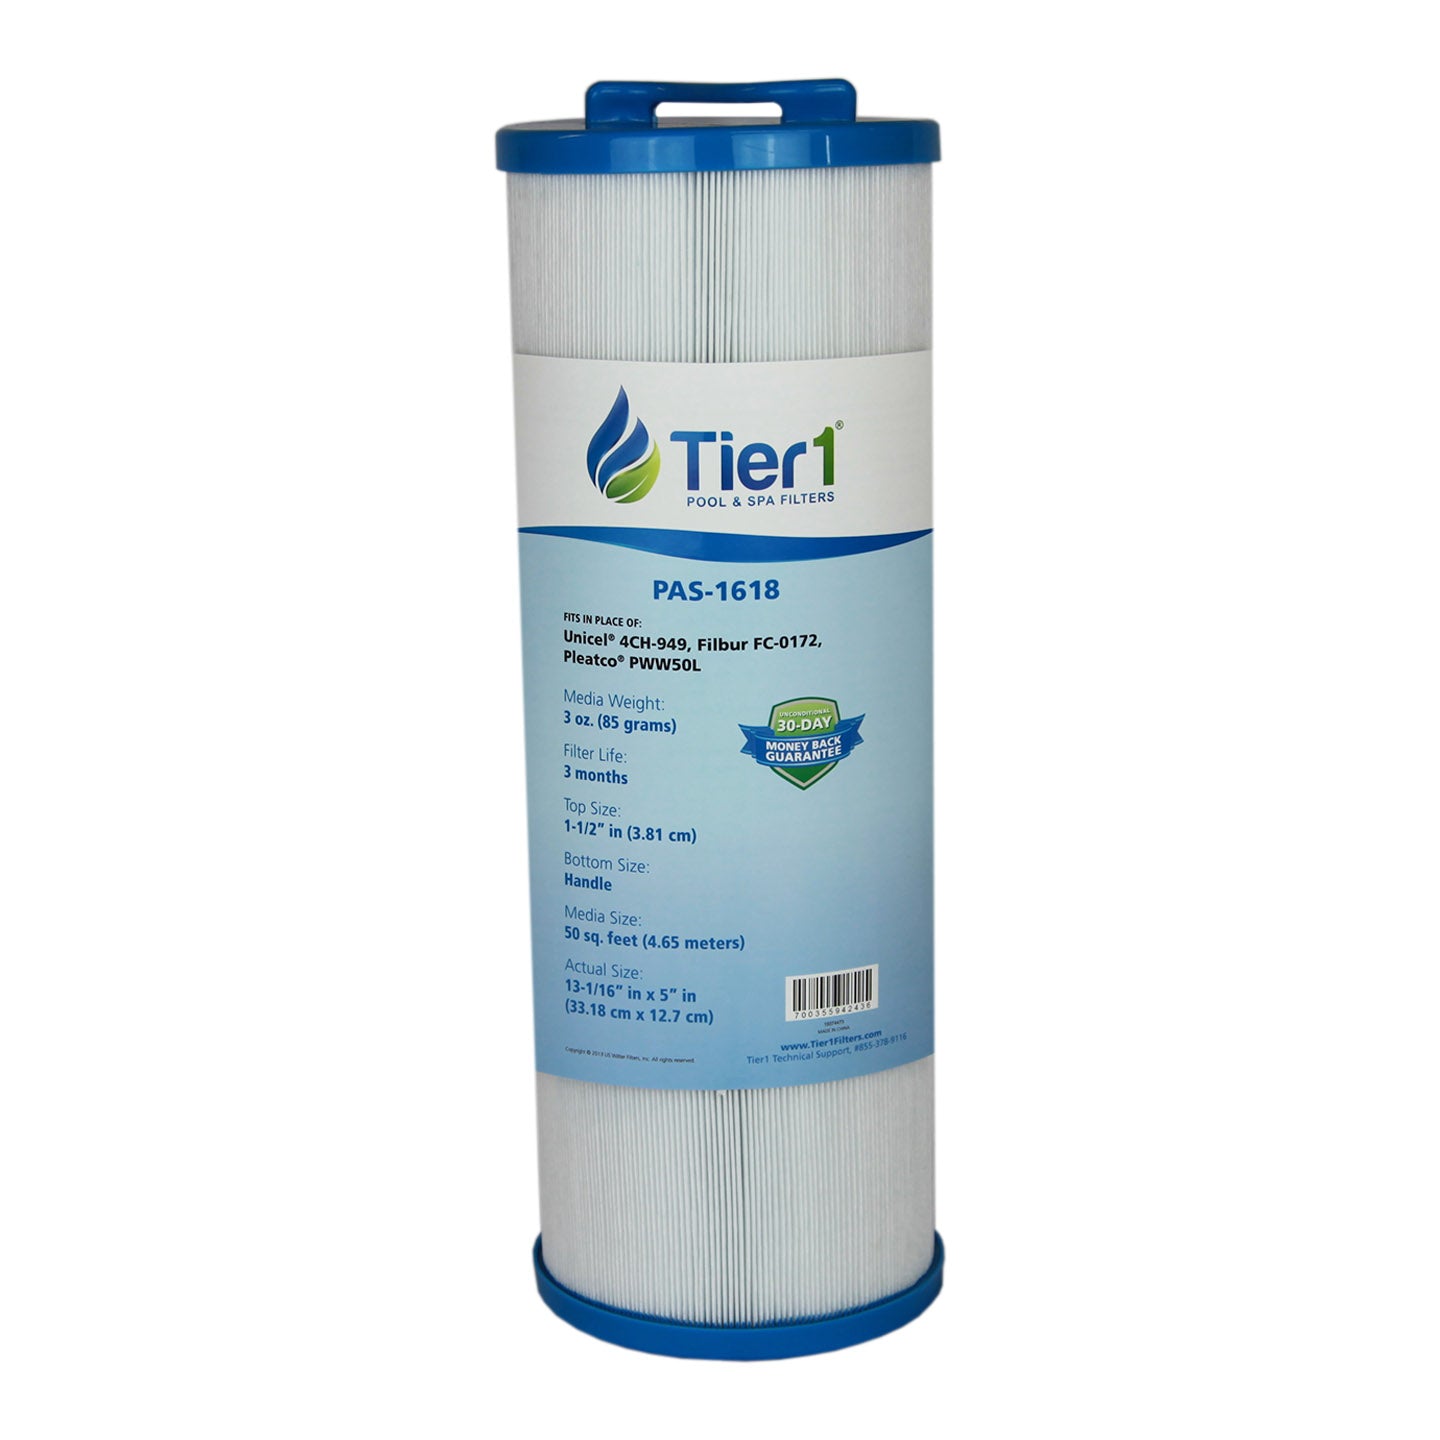 Tier1 Brand Replacement Pool and Spa Filter for 817-4050